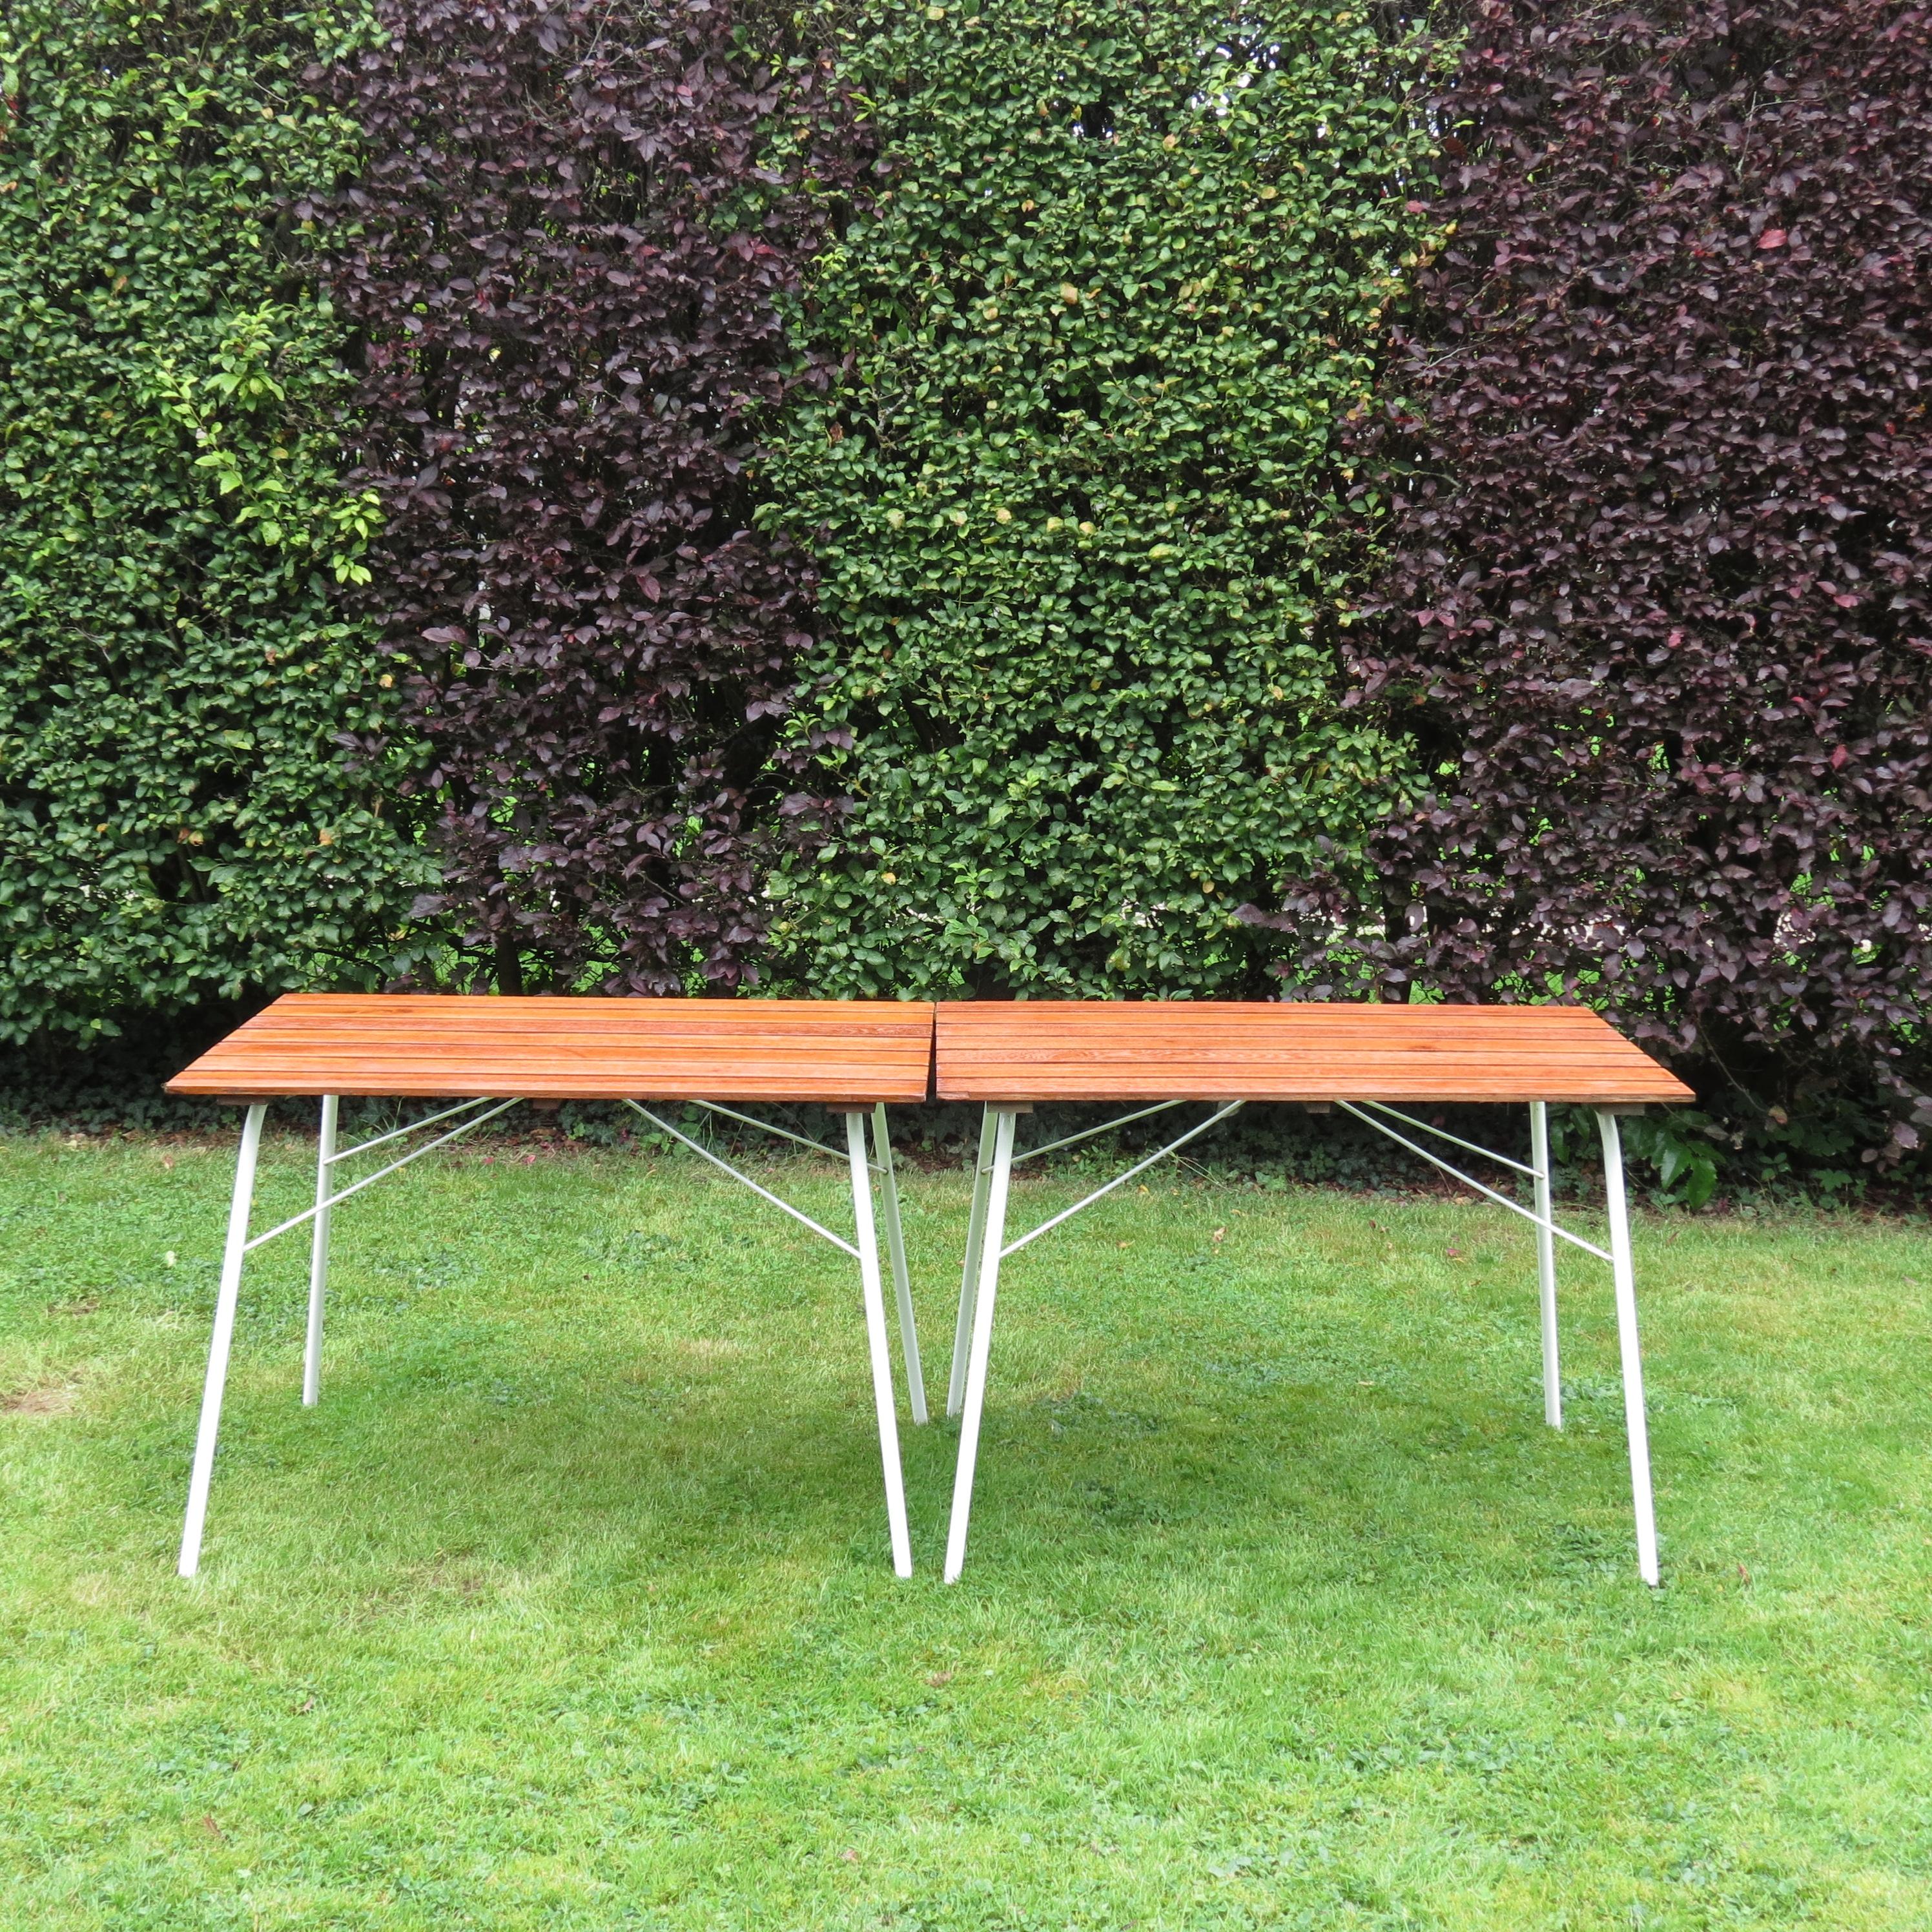 Wonderful folding garden table, designed and produced by Daneline, Denmark.

Plastic coated steel tube frame with solid Teak slatted top. The table legs fold away when not in use for ease of storage.

Dating from the 1960s,  in good condition, with